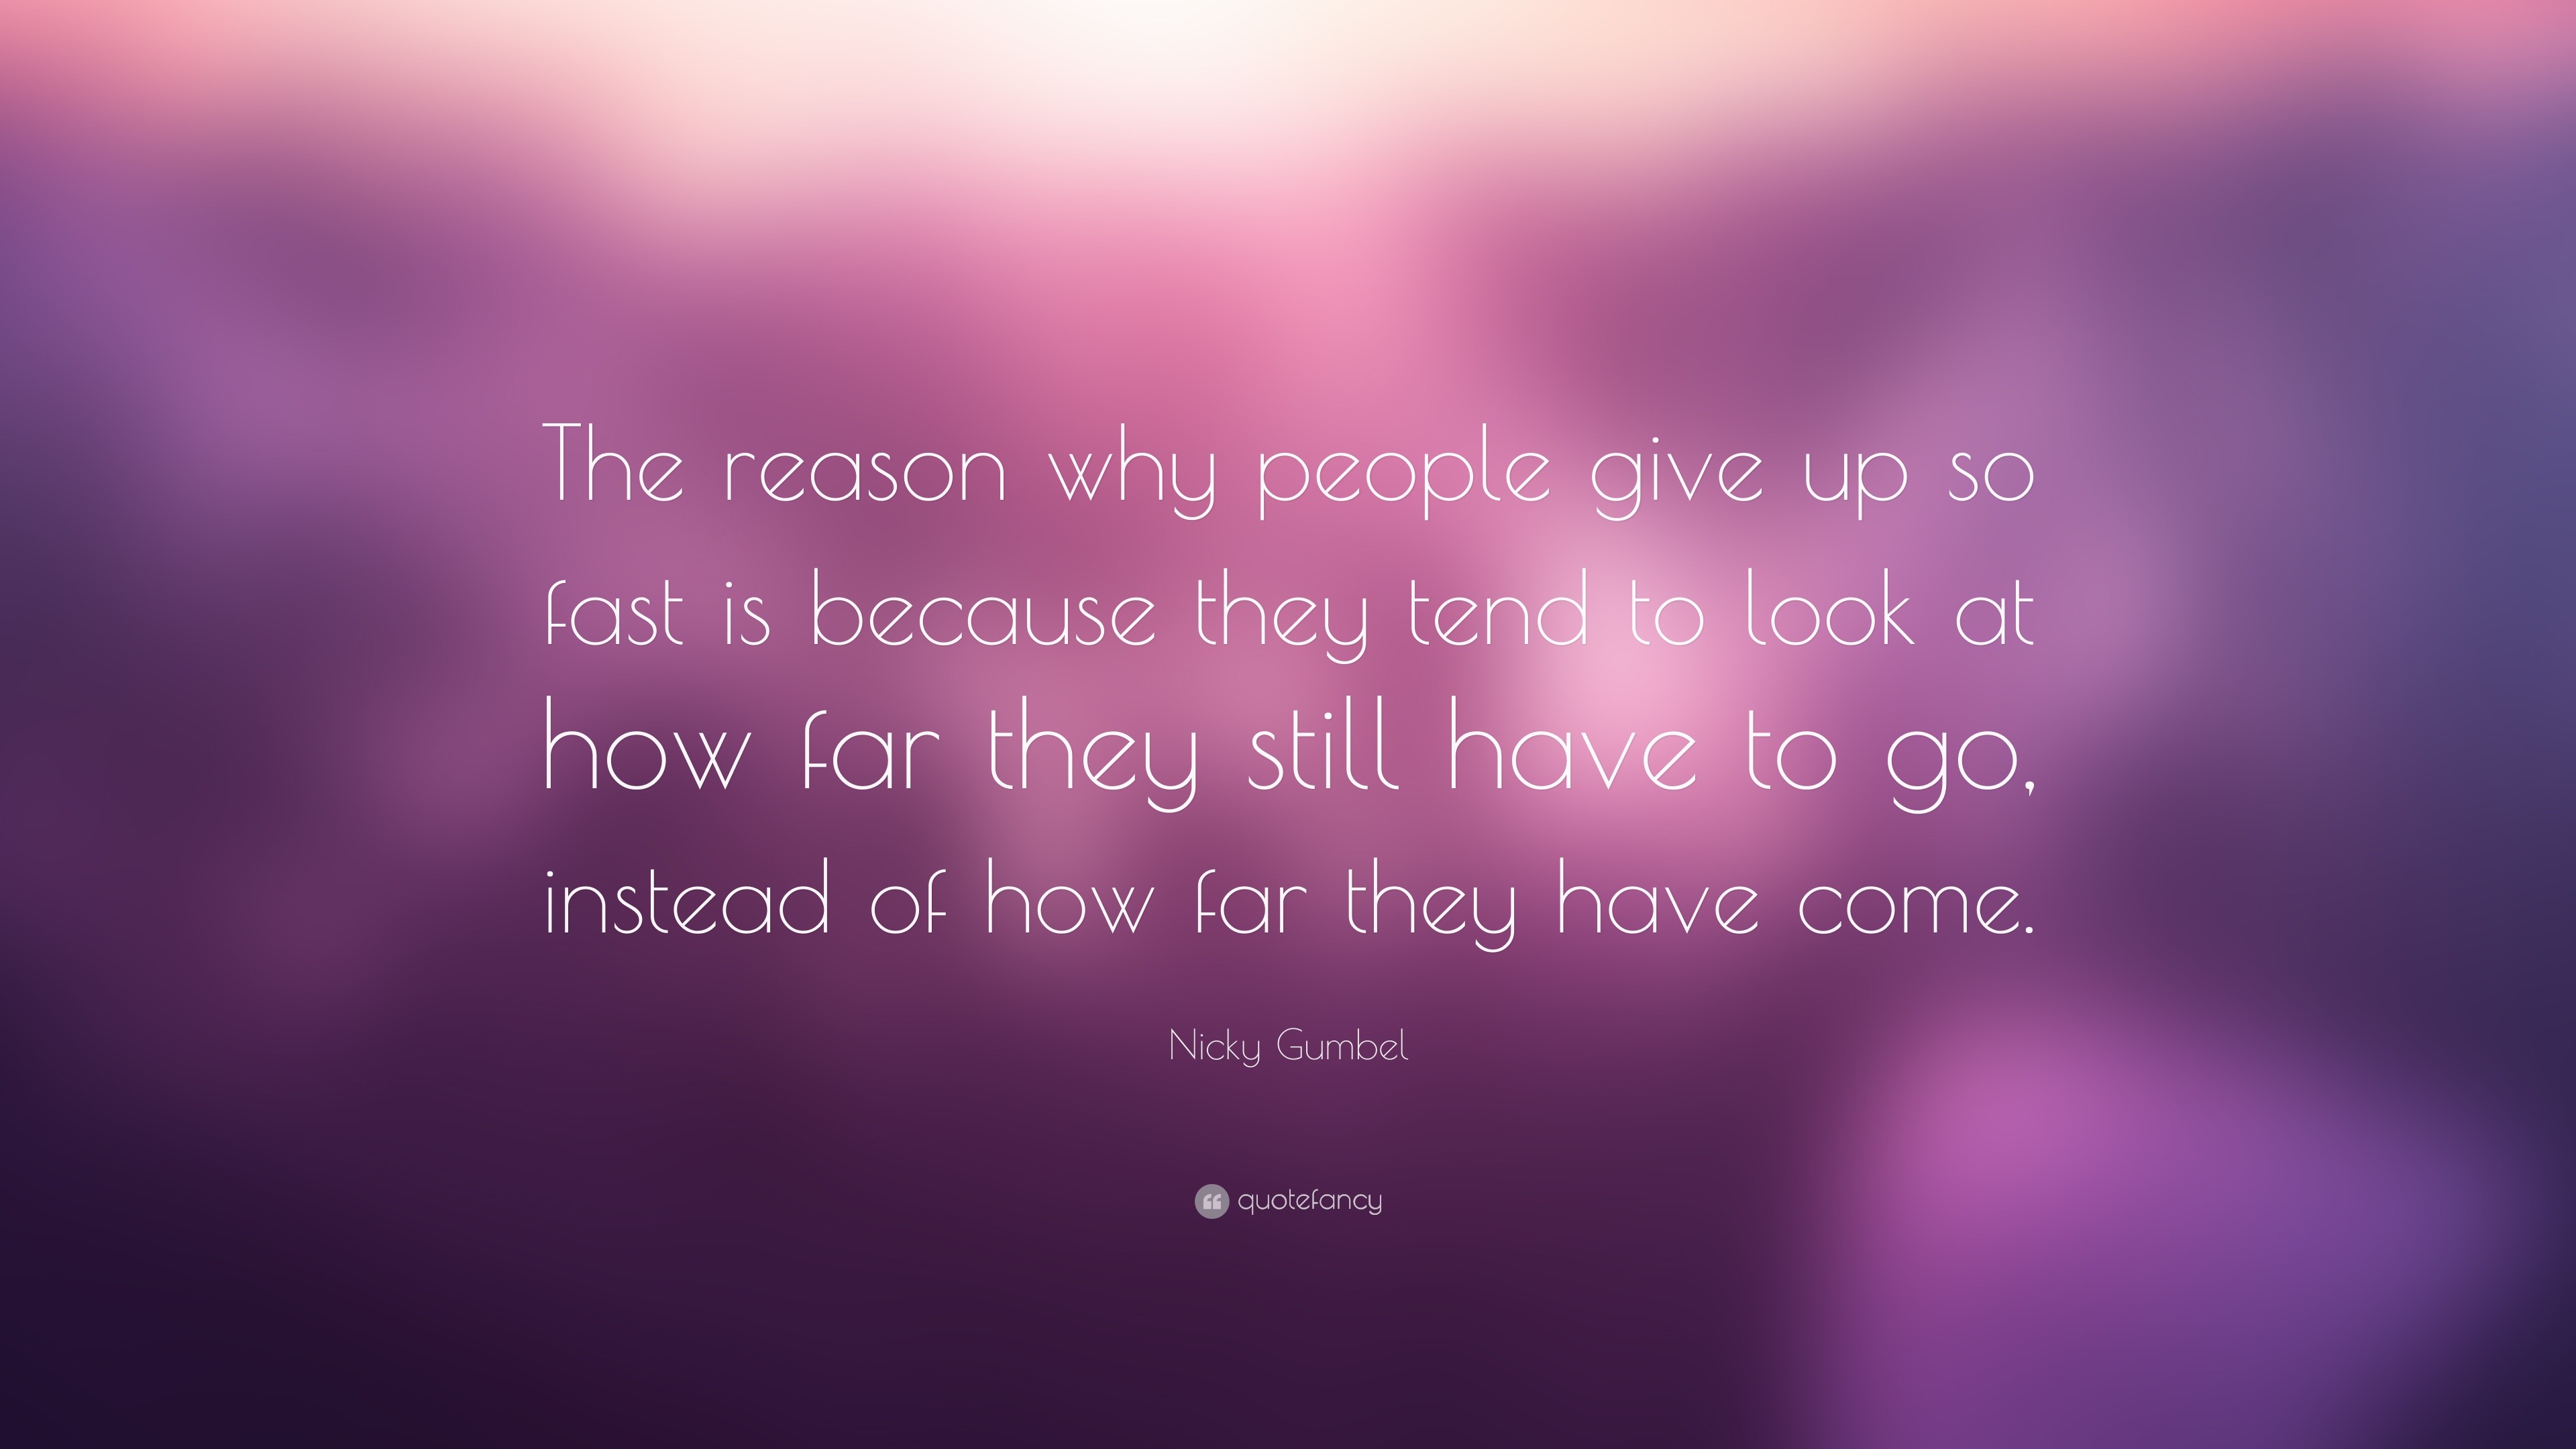 Nicky Gumbel Quote: “The reason why people give up so fast is because ...